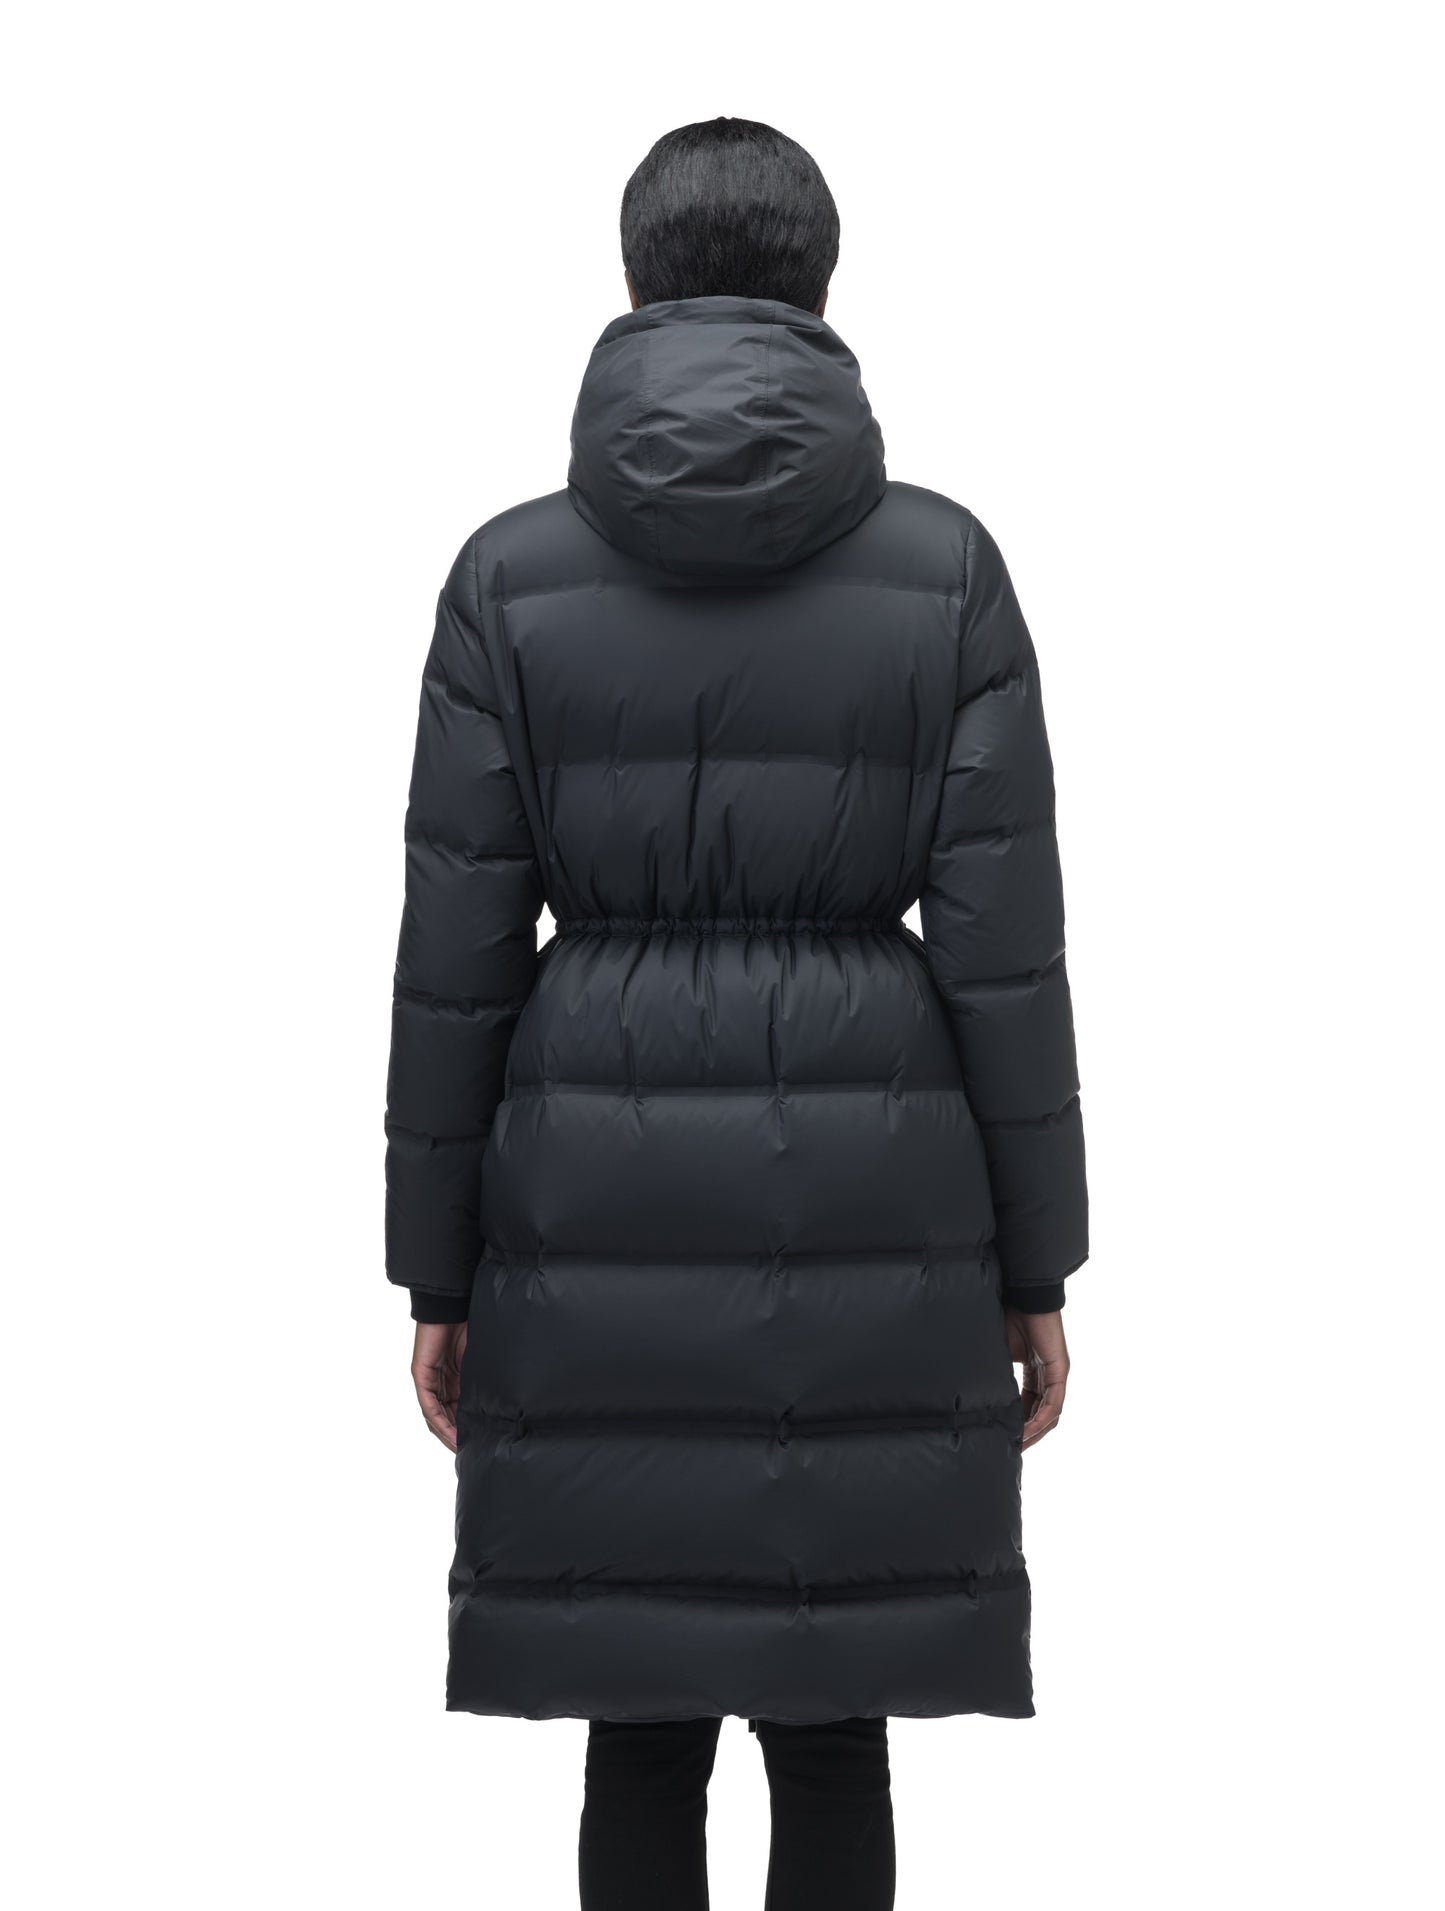 Women's knee length down filled hooded parka with adjustable waist in Black